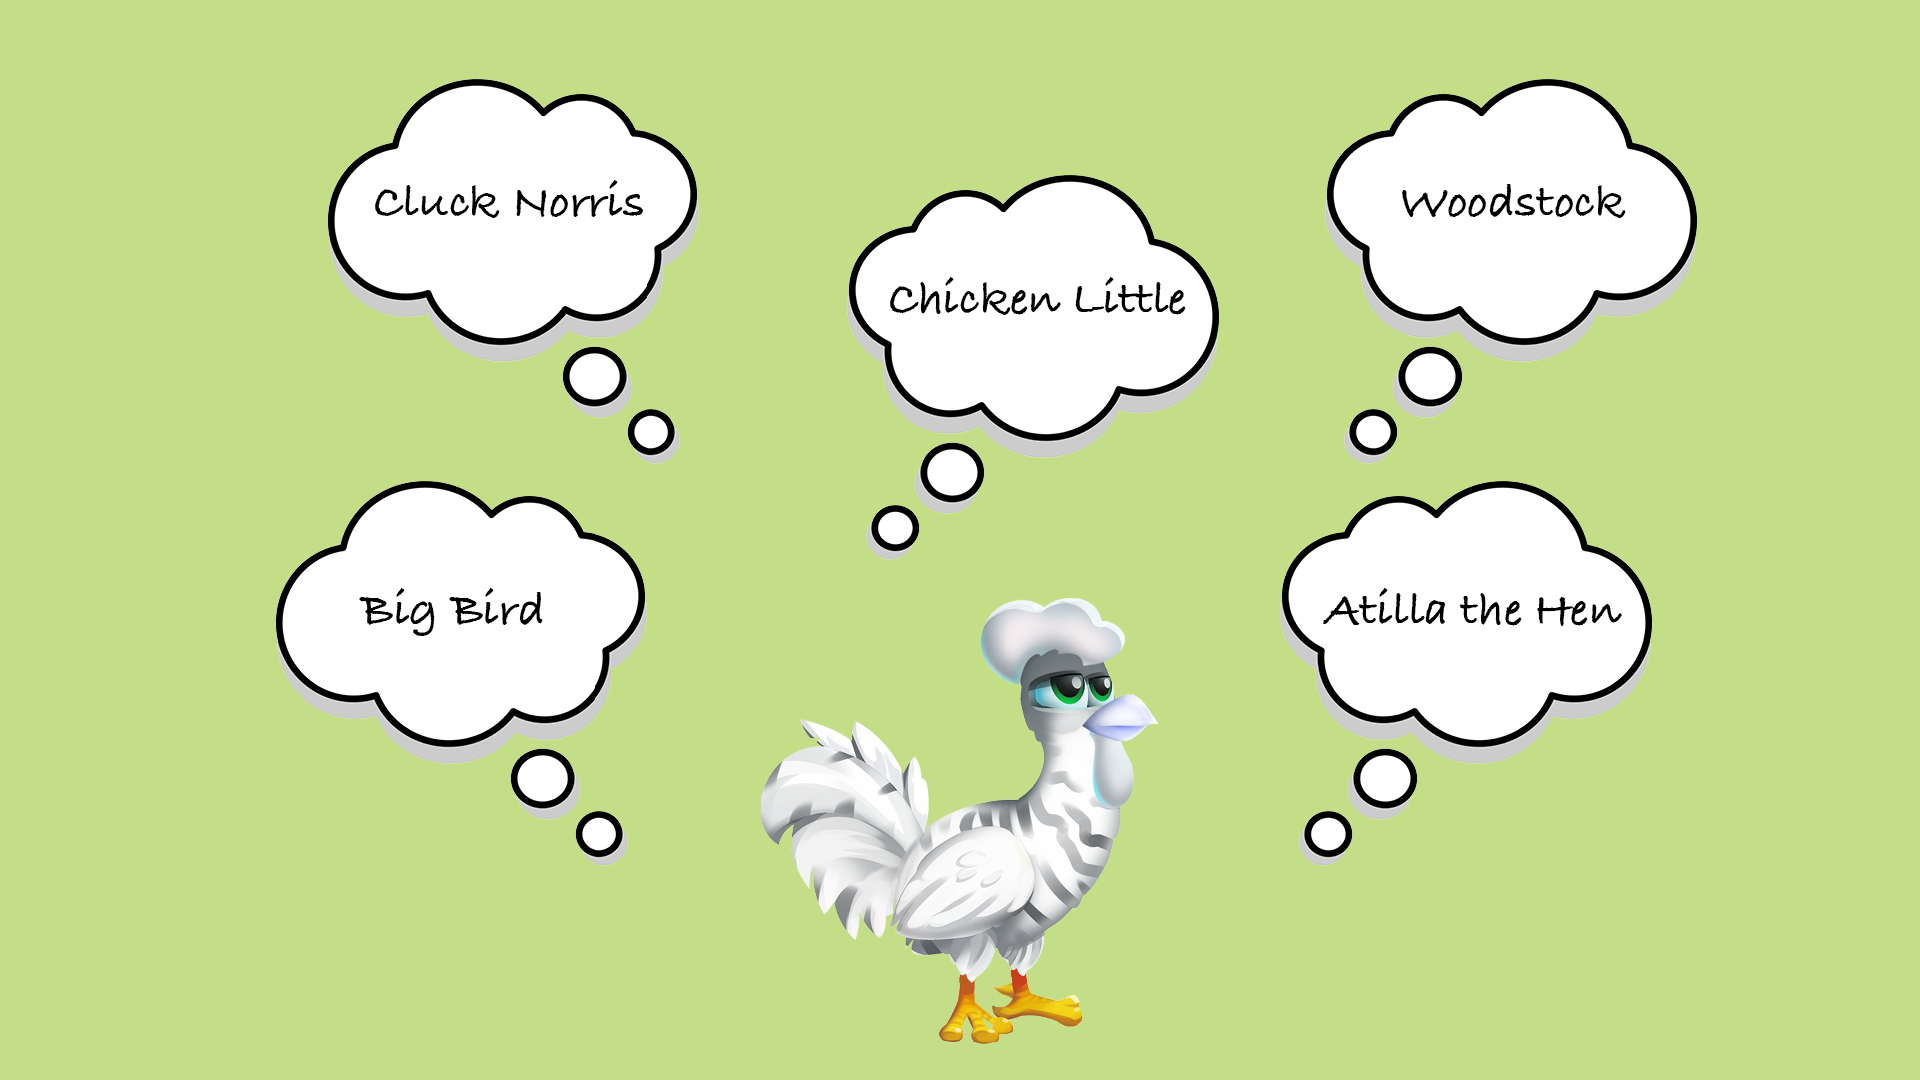 Should You Name Your Chicken?